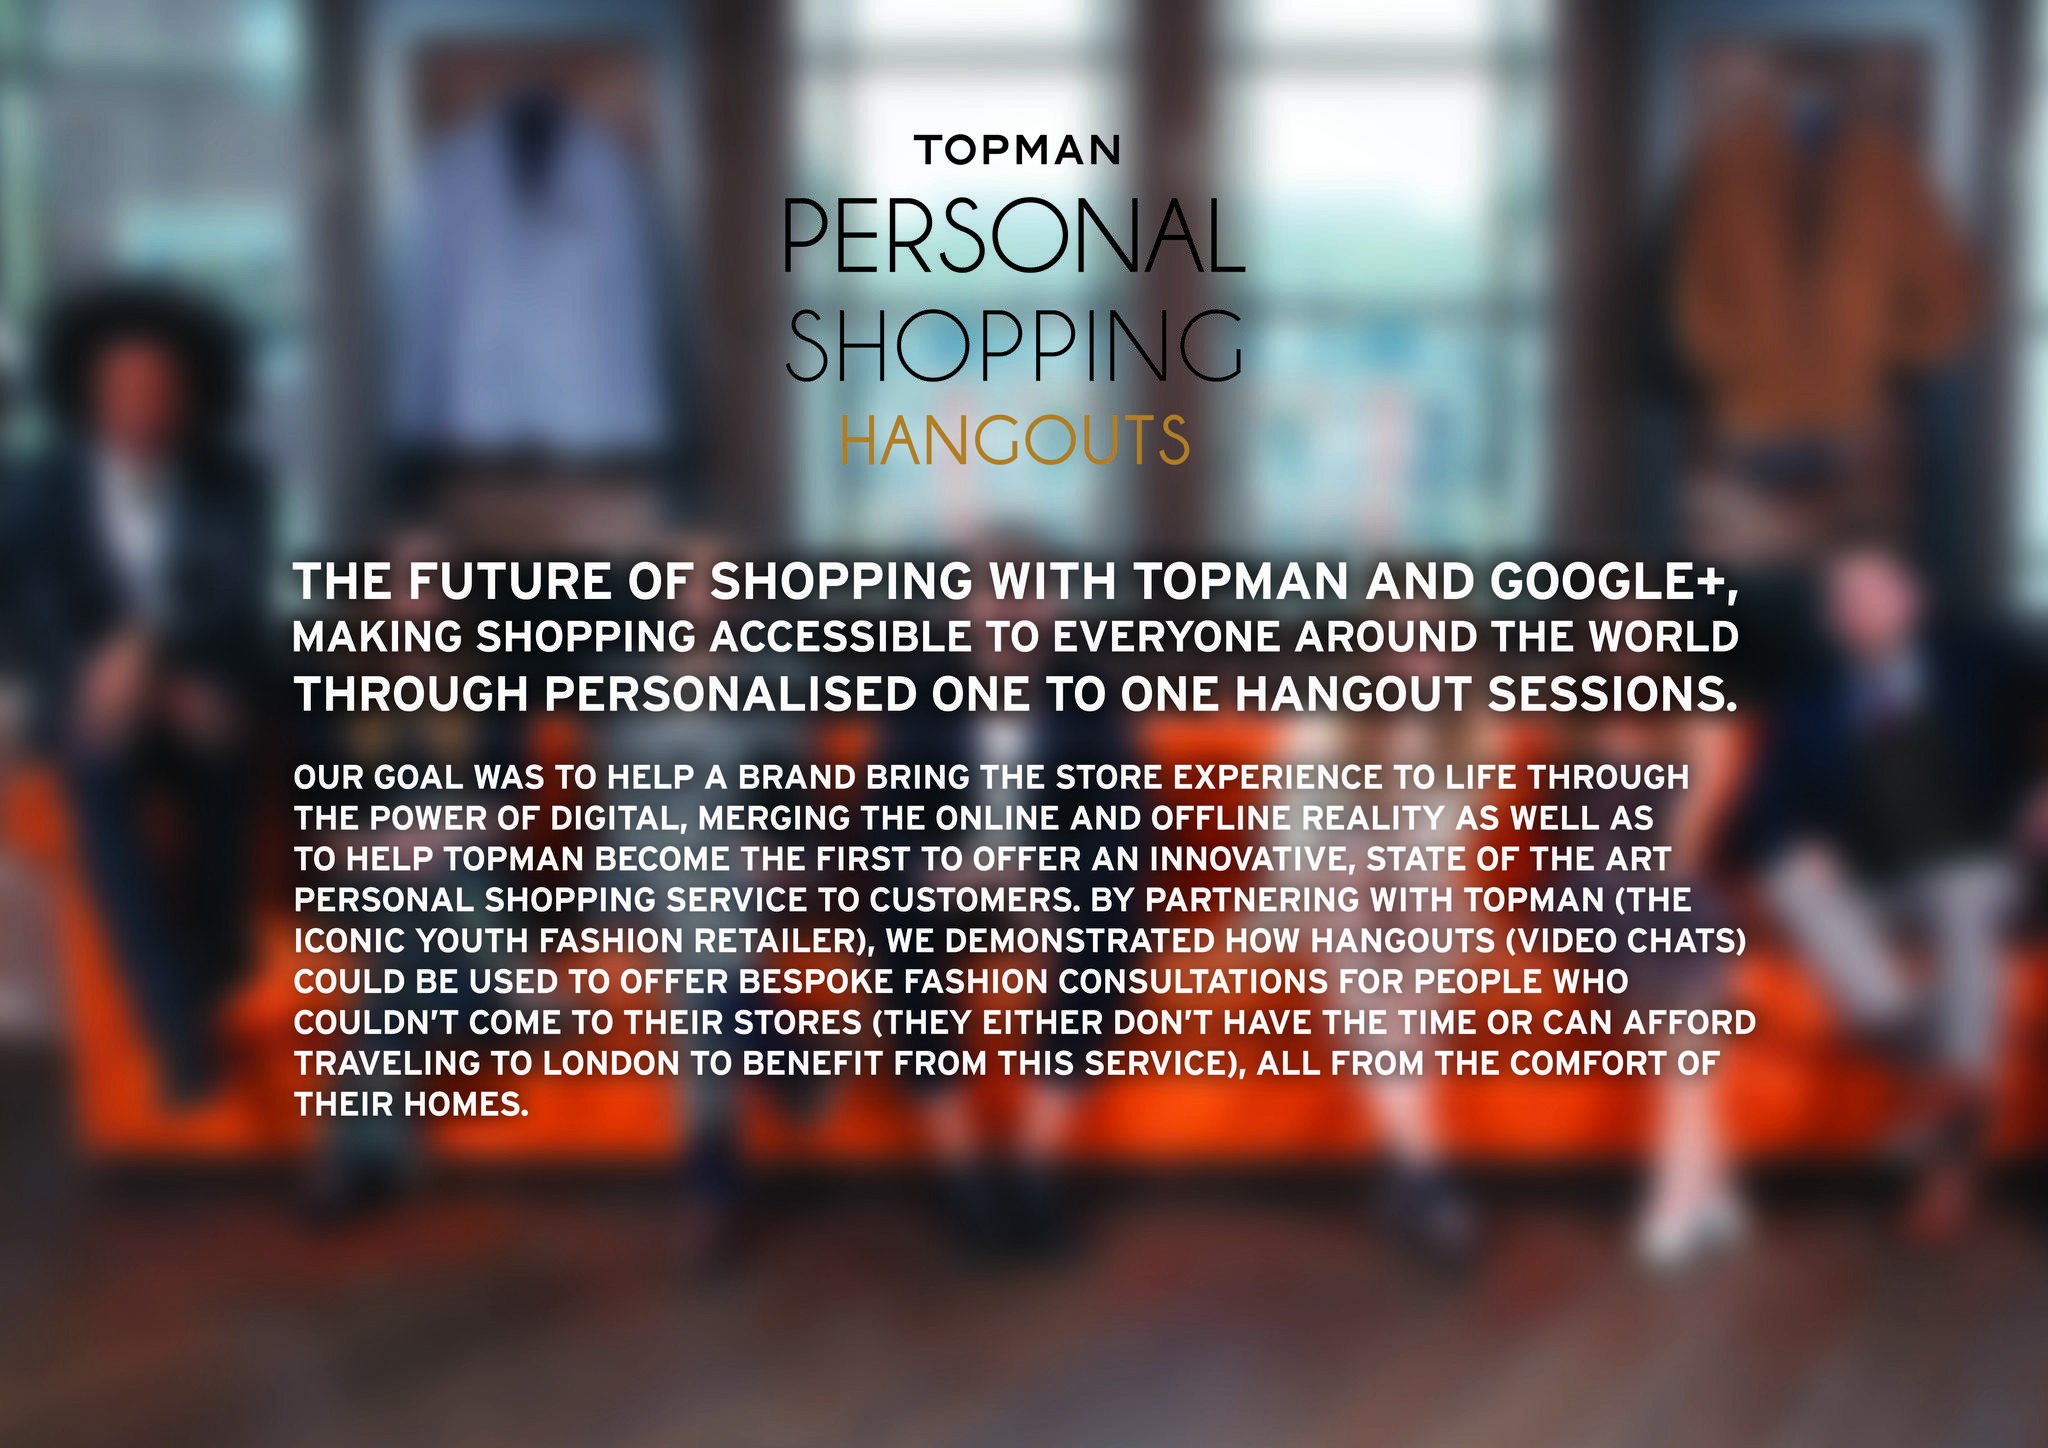 THE FUTURE OF SHOPPING WITH GOOGLE+ AND TOPMAN